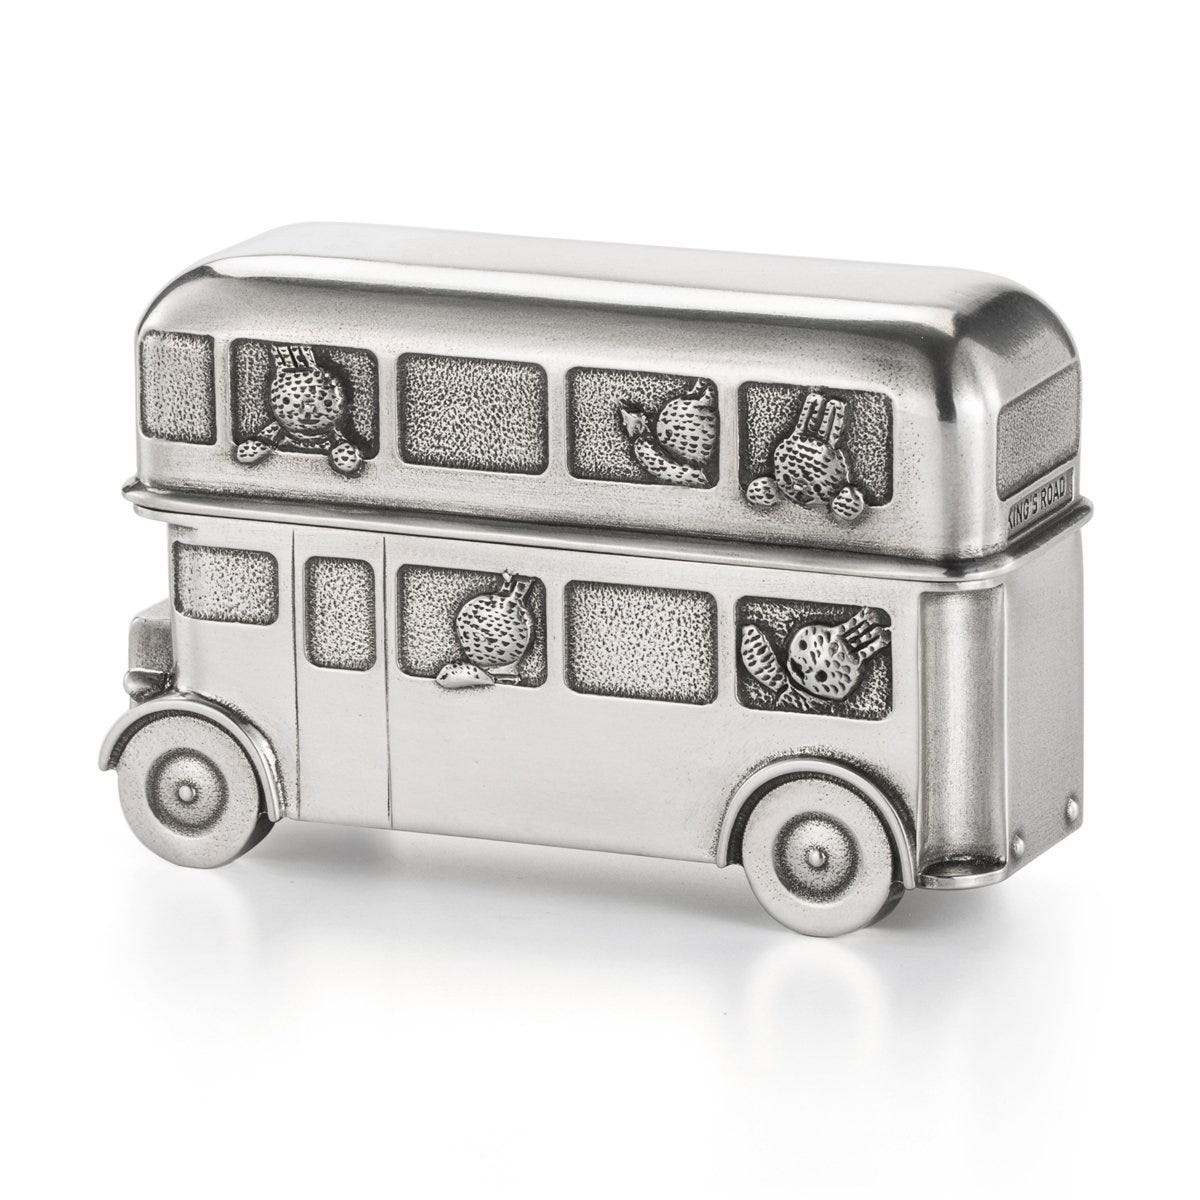 Routemaster Double Decker Bus Container - Pewter - Notbrand